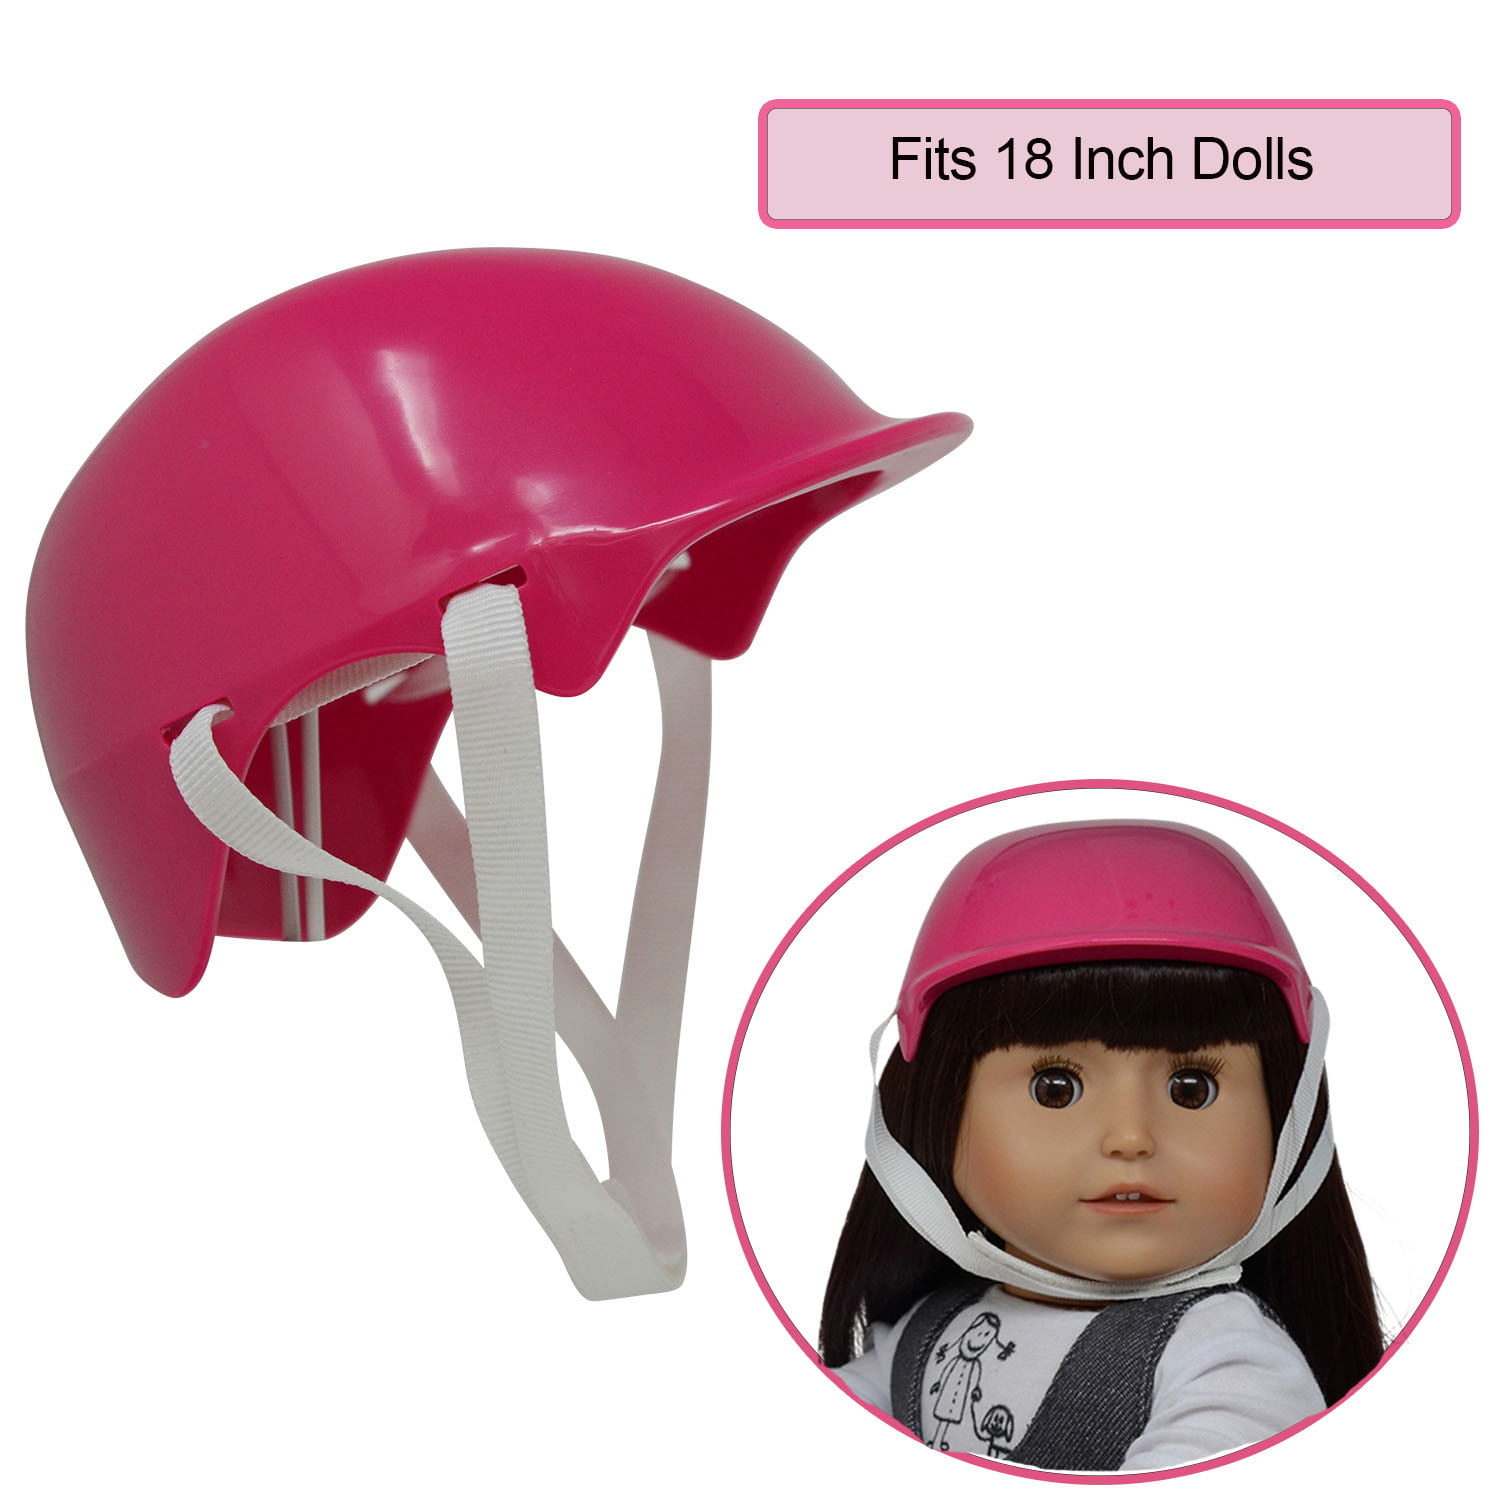 Milliard Doll Bike Seat and Helmet for 18 inch American Girl Dolls with Sticker 